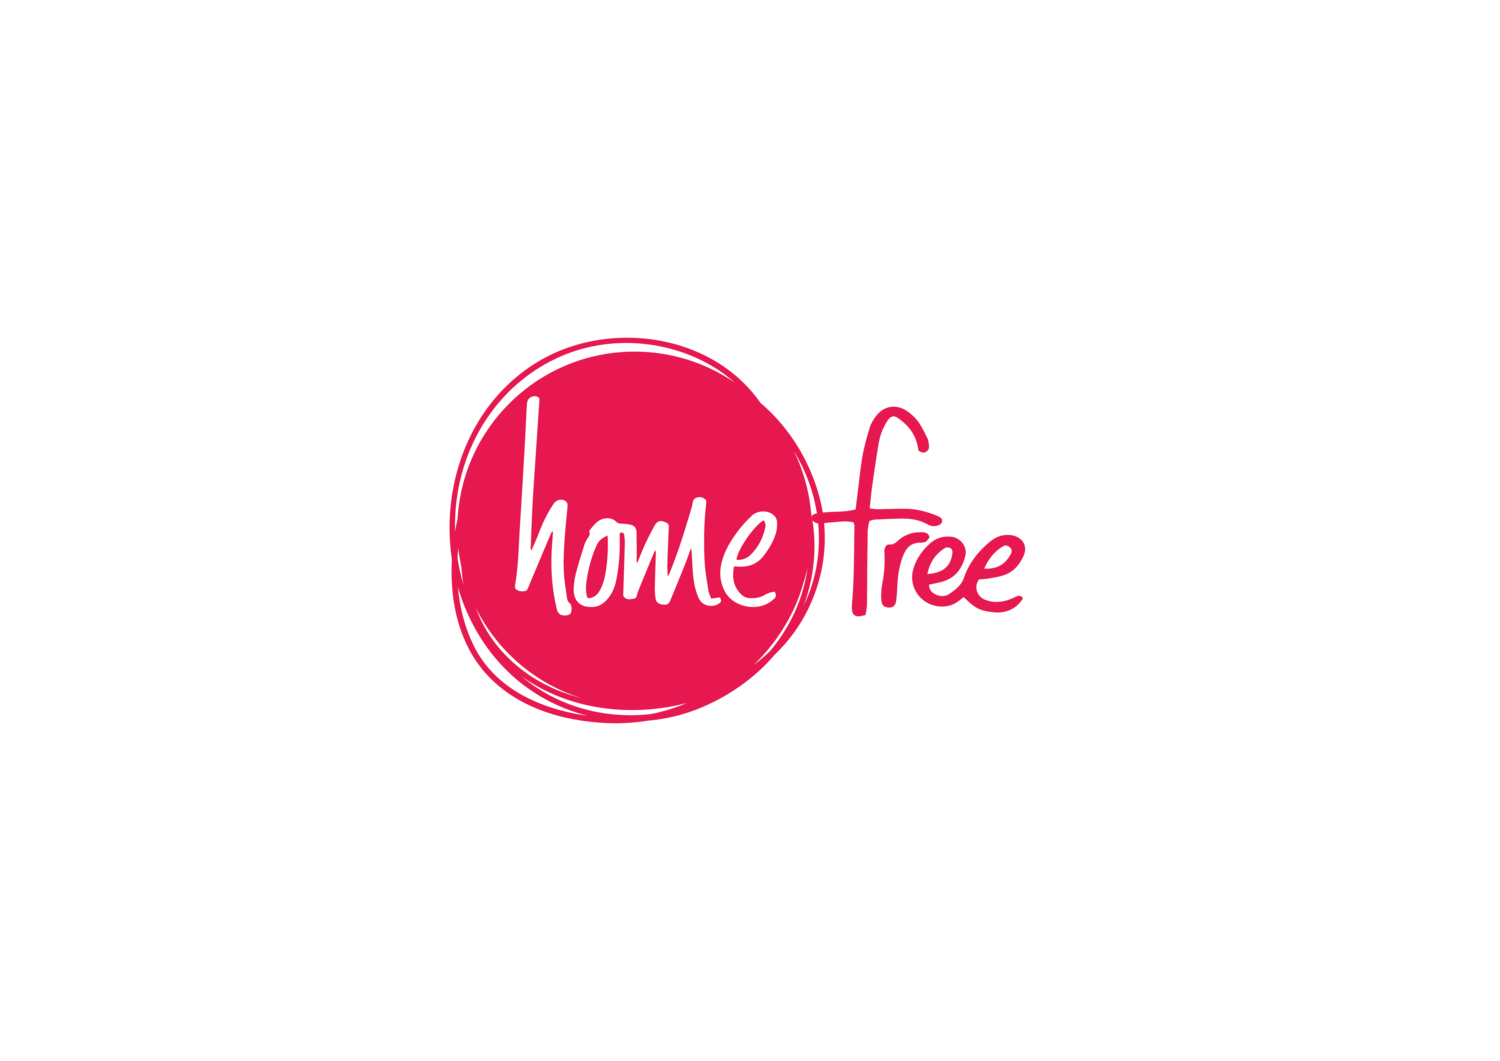 Home Free - Changing the Way We Care